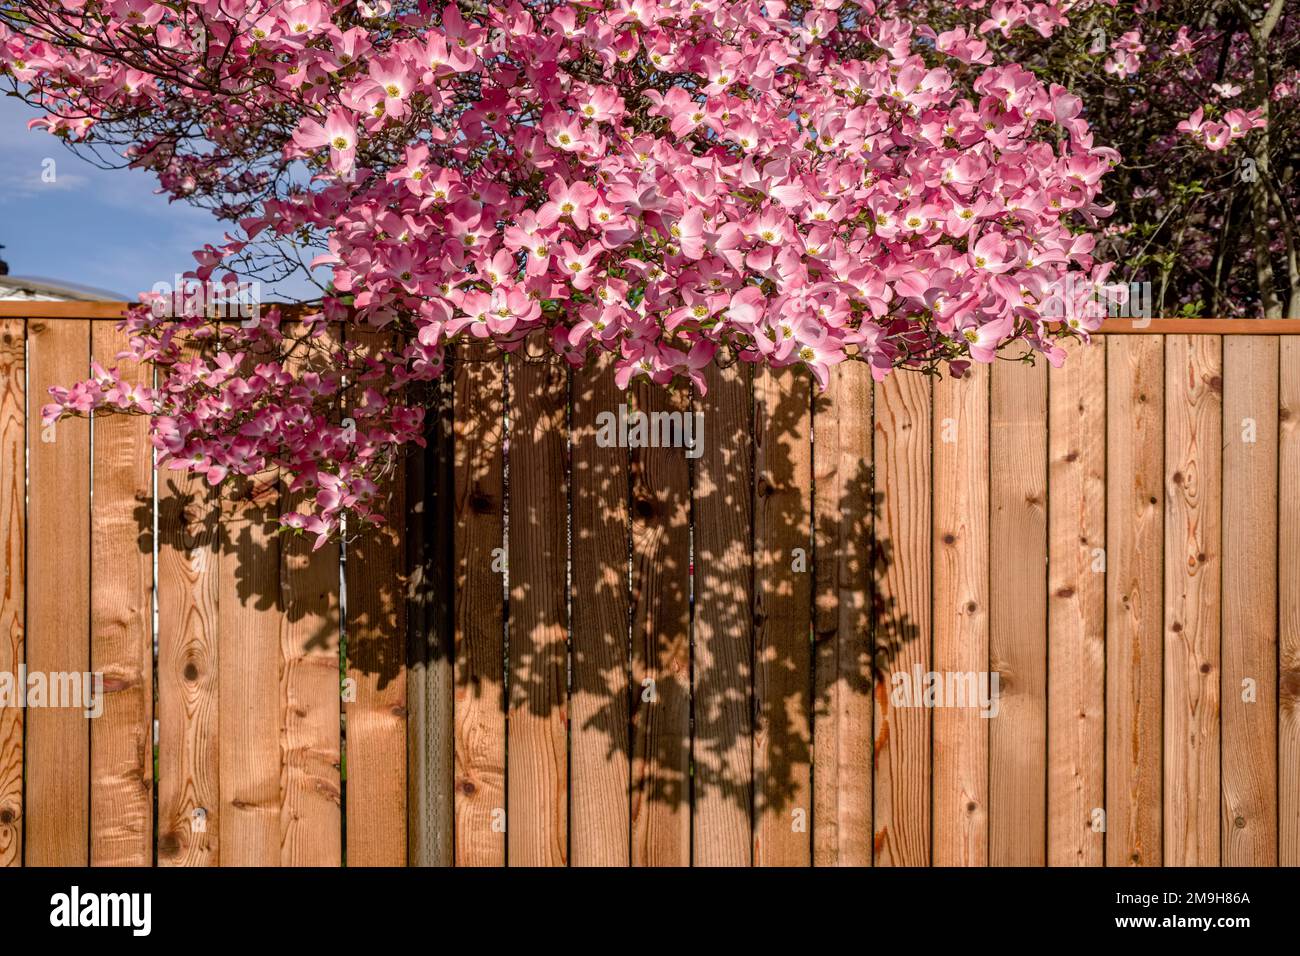 Branches with blossoming pink flowers hanging over wooden fence Stock Photo